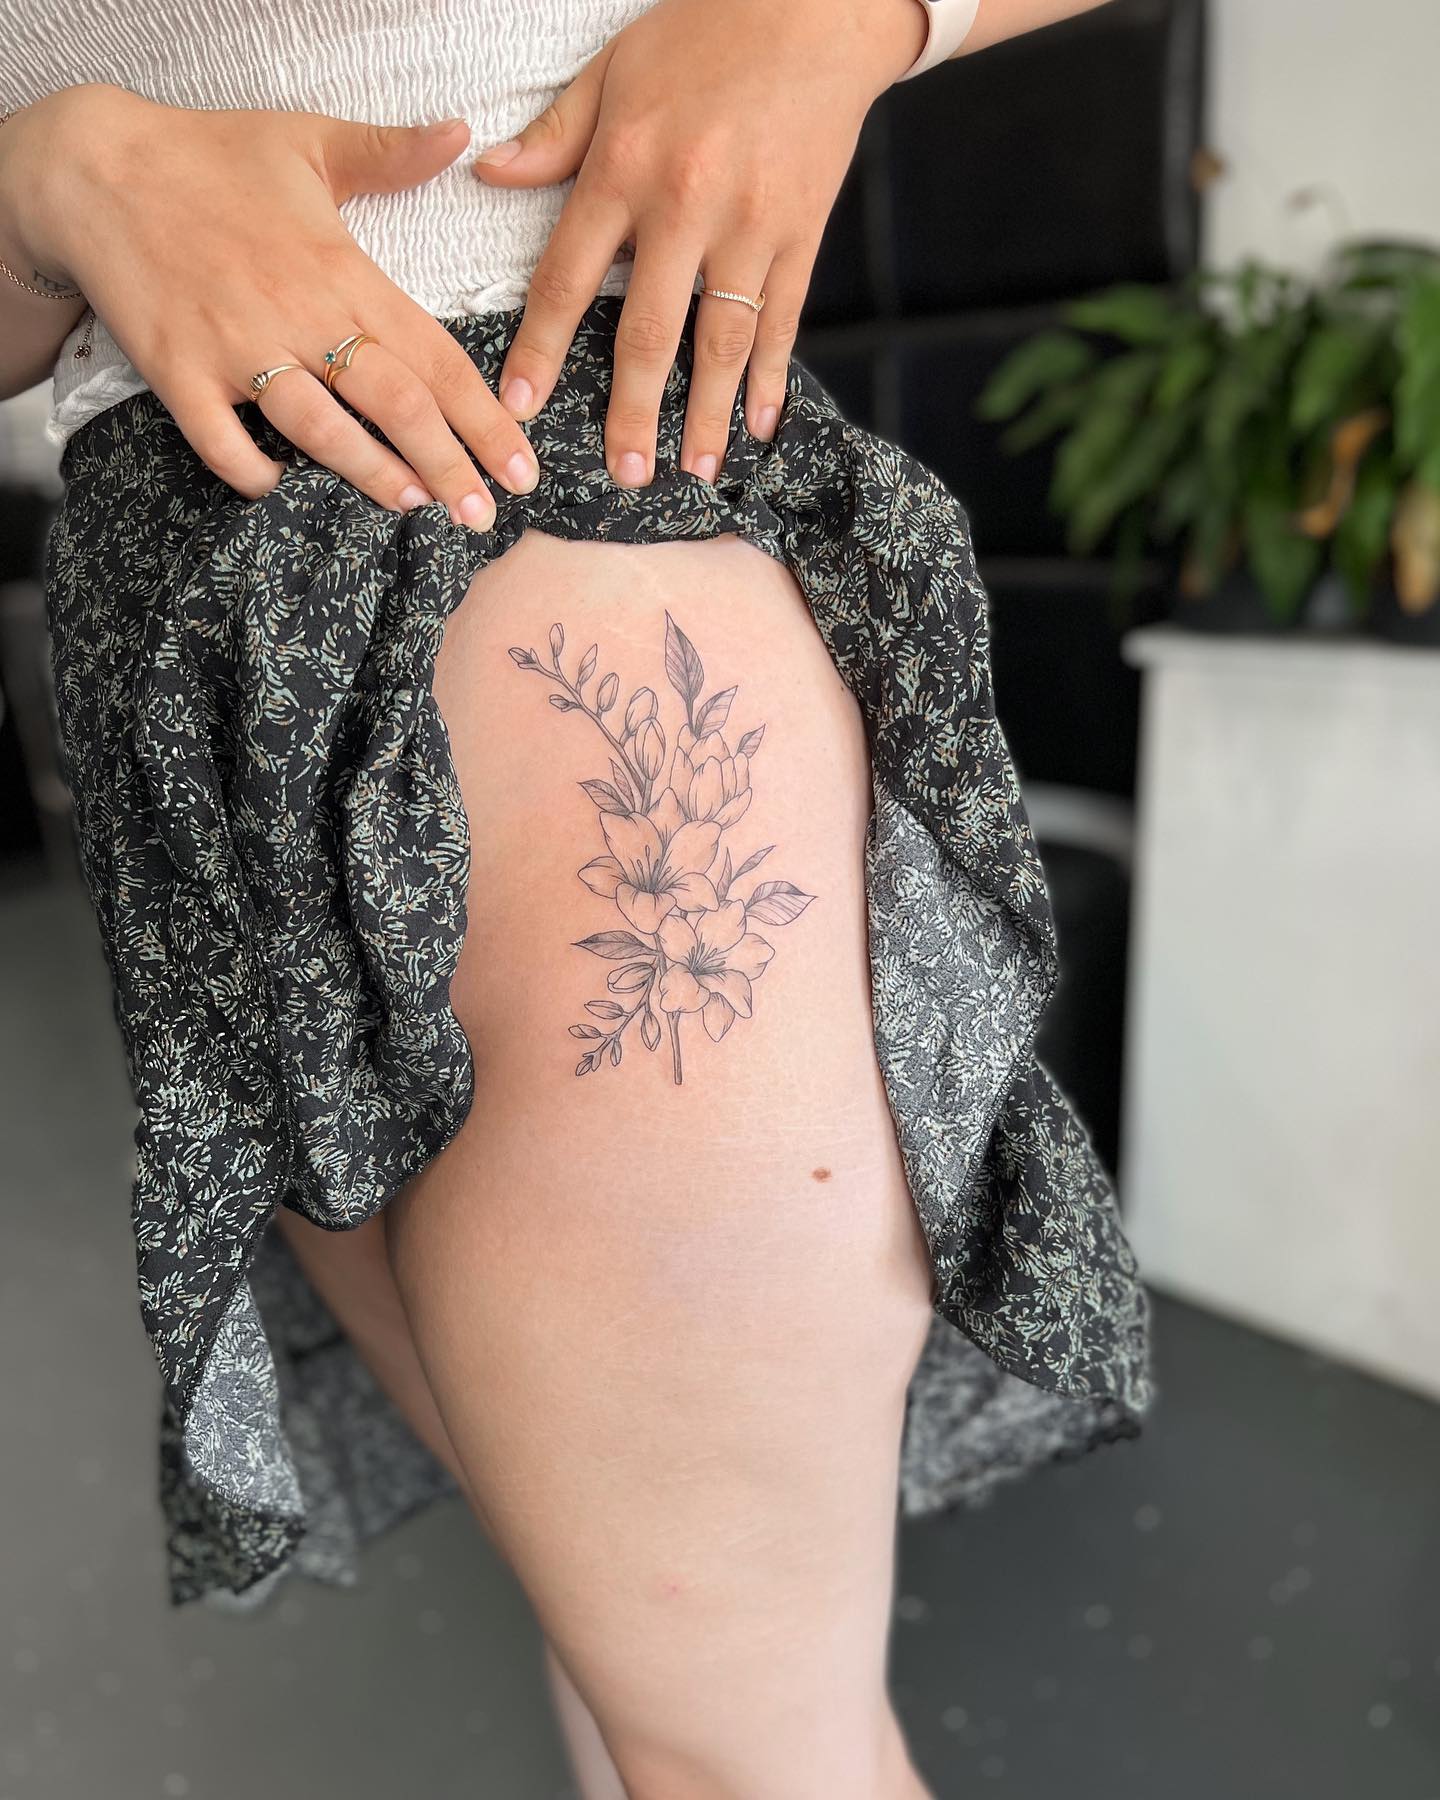 Cool and subtle, this floral hip design will suit those who want something cute and small. The best part about this tattoo is that it will take you less than 2 hours to do it.